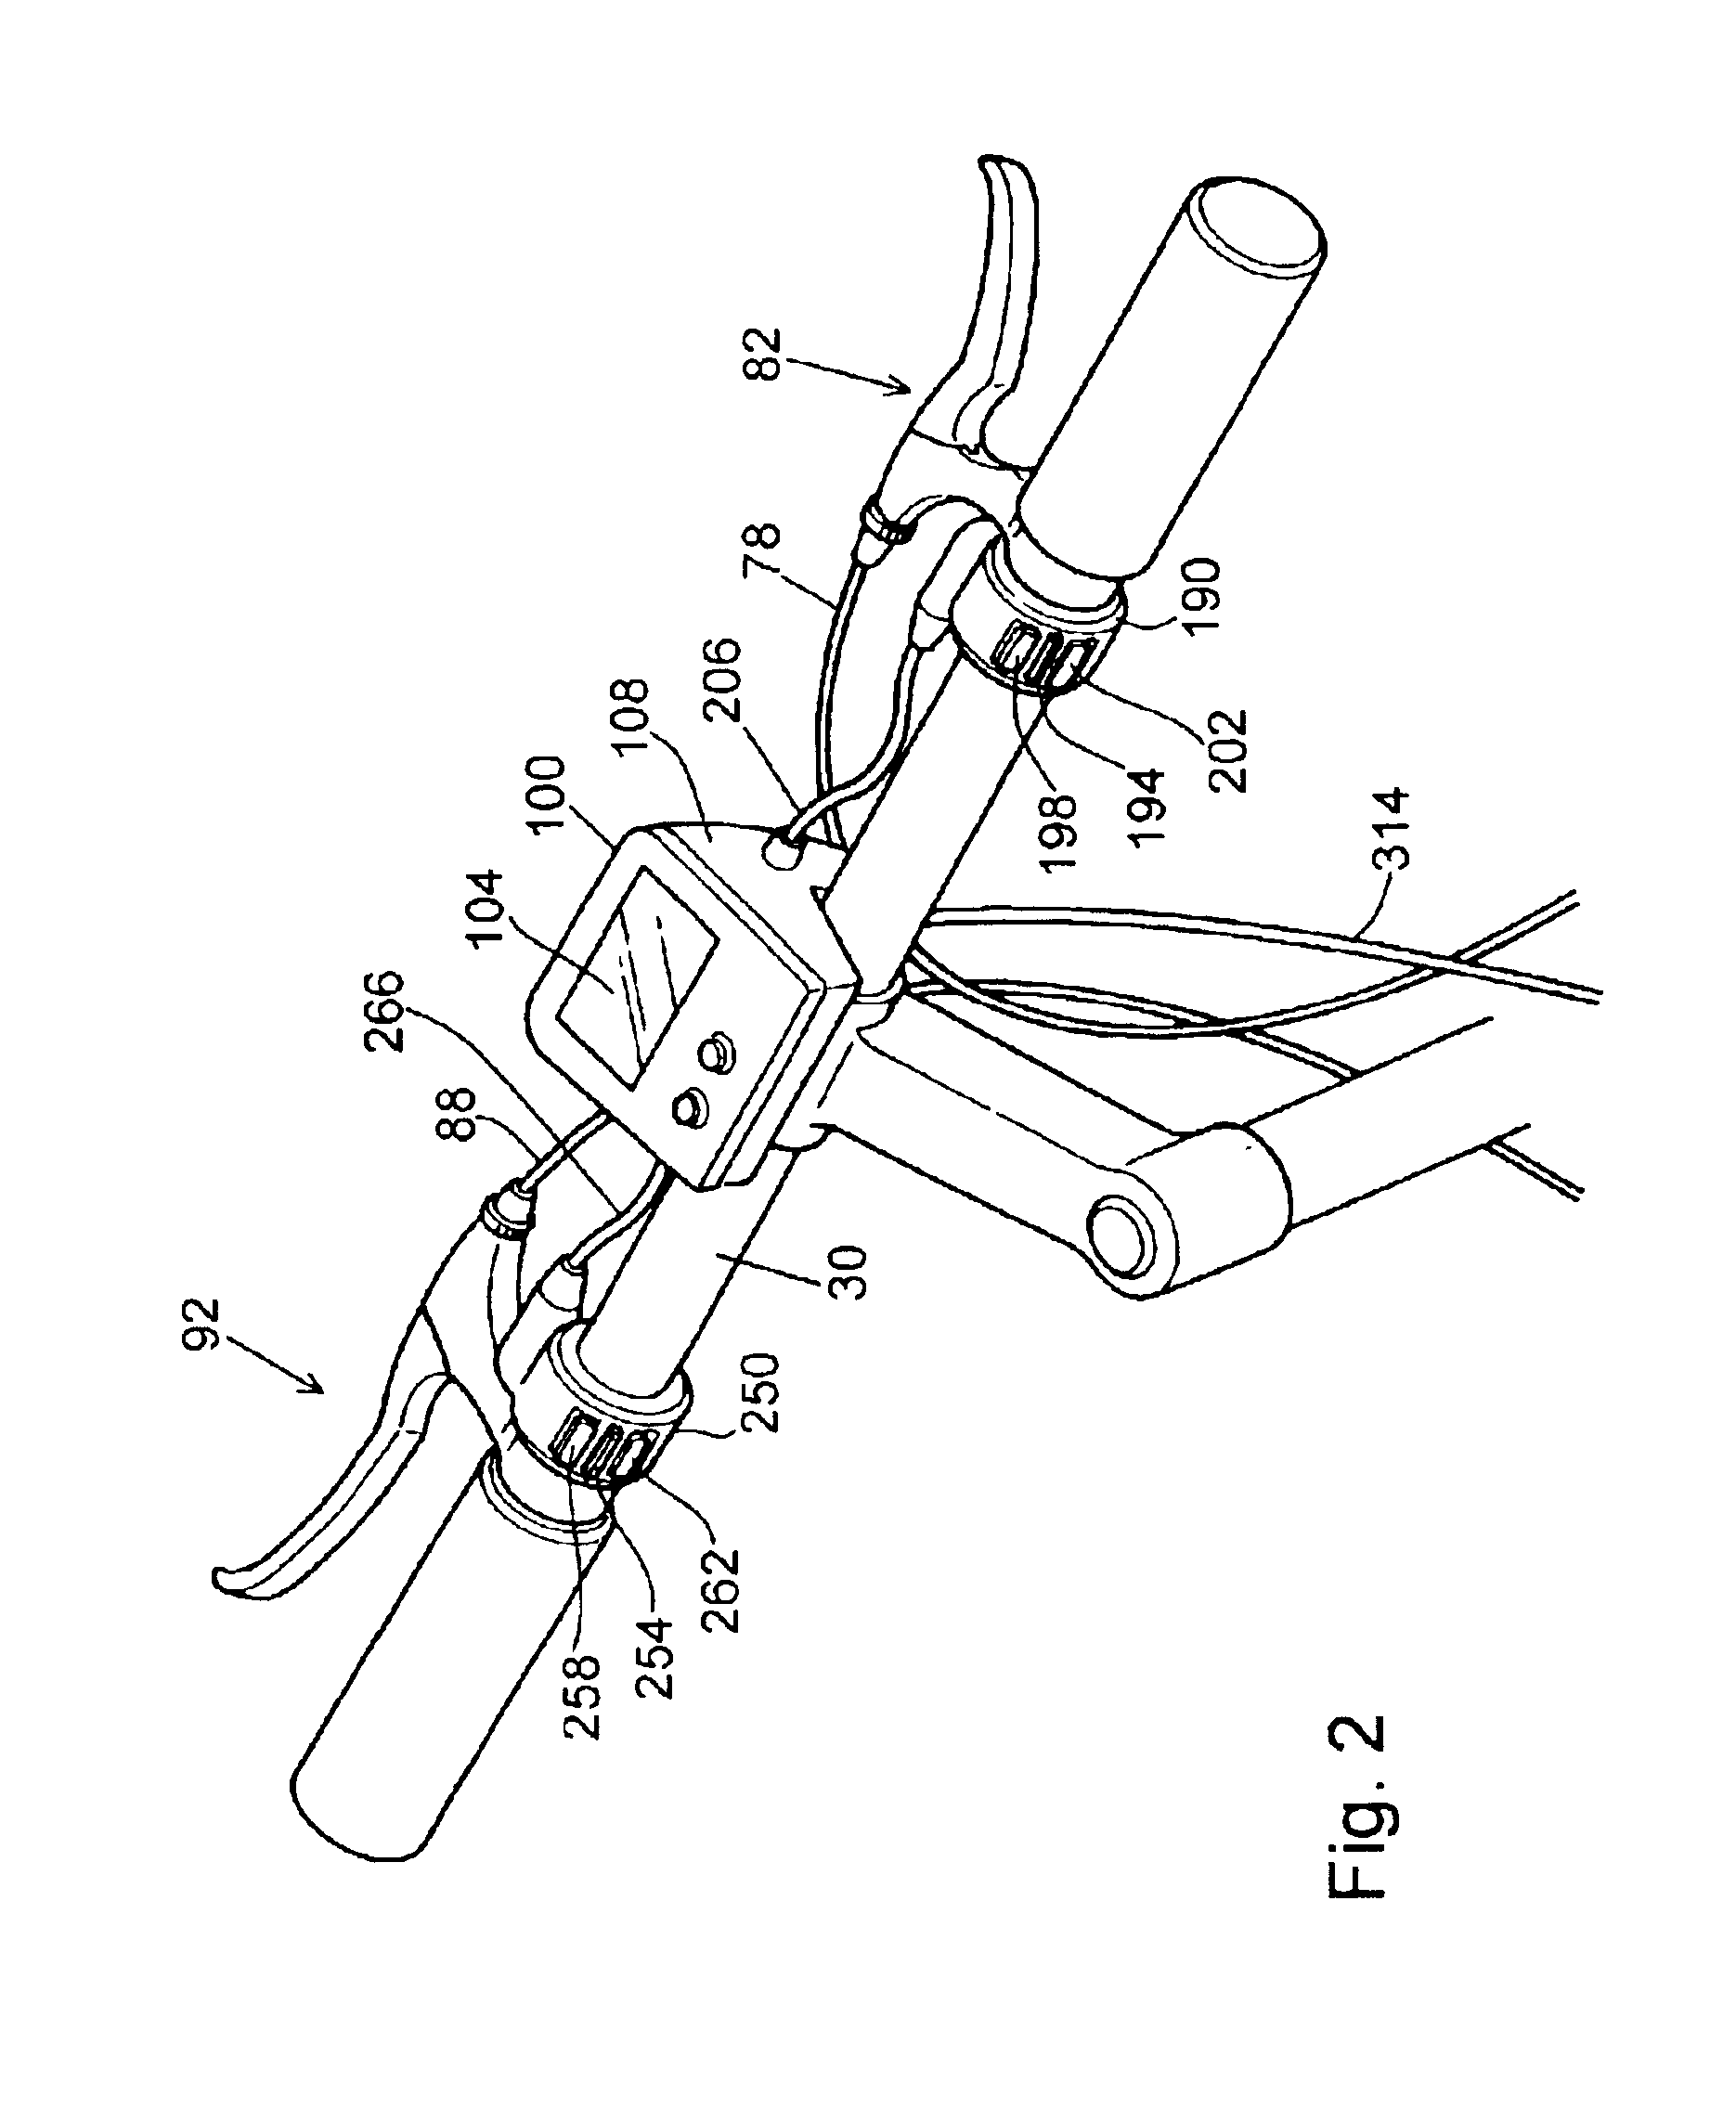 Combined analog and digital derailleur position processing apparatus